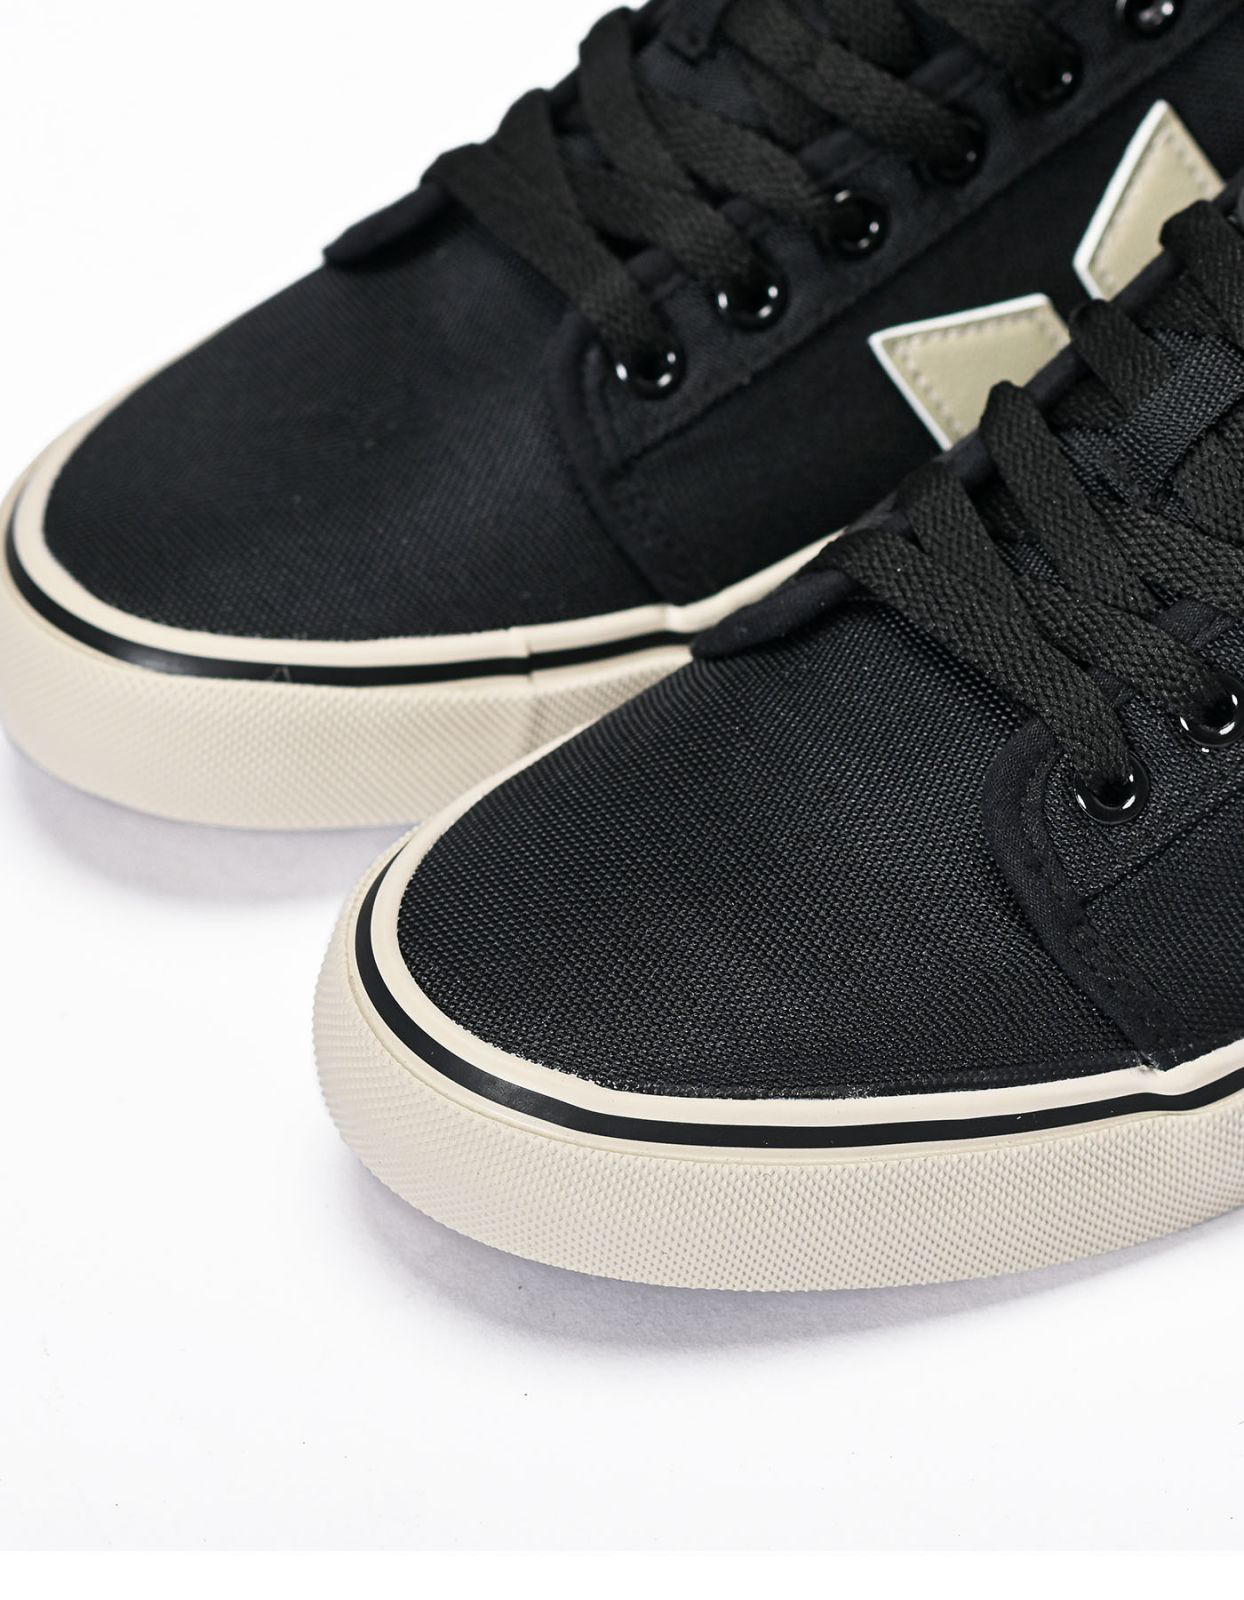 JAMES ( Black / Cement ) | Macbeth Philippines - Apparel, Footwear and More